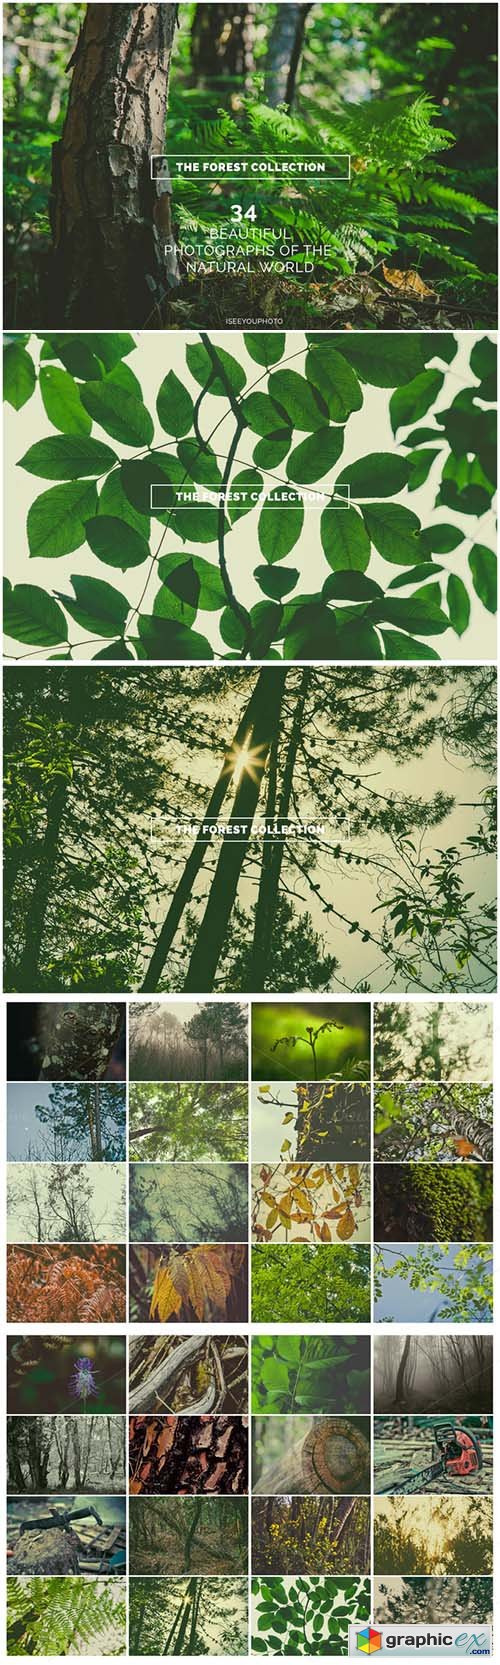 The Forest Collection - Iseeyouphoto